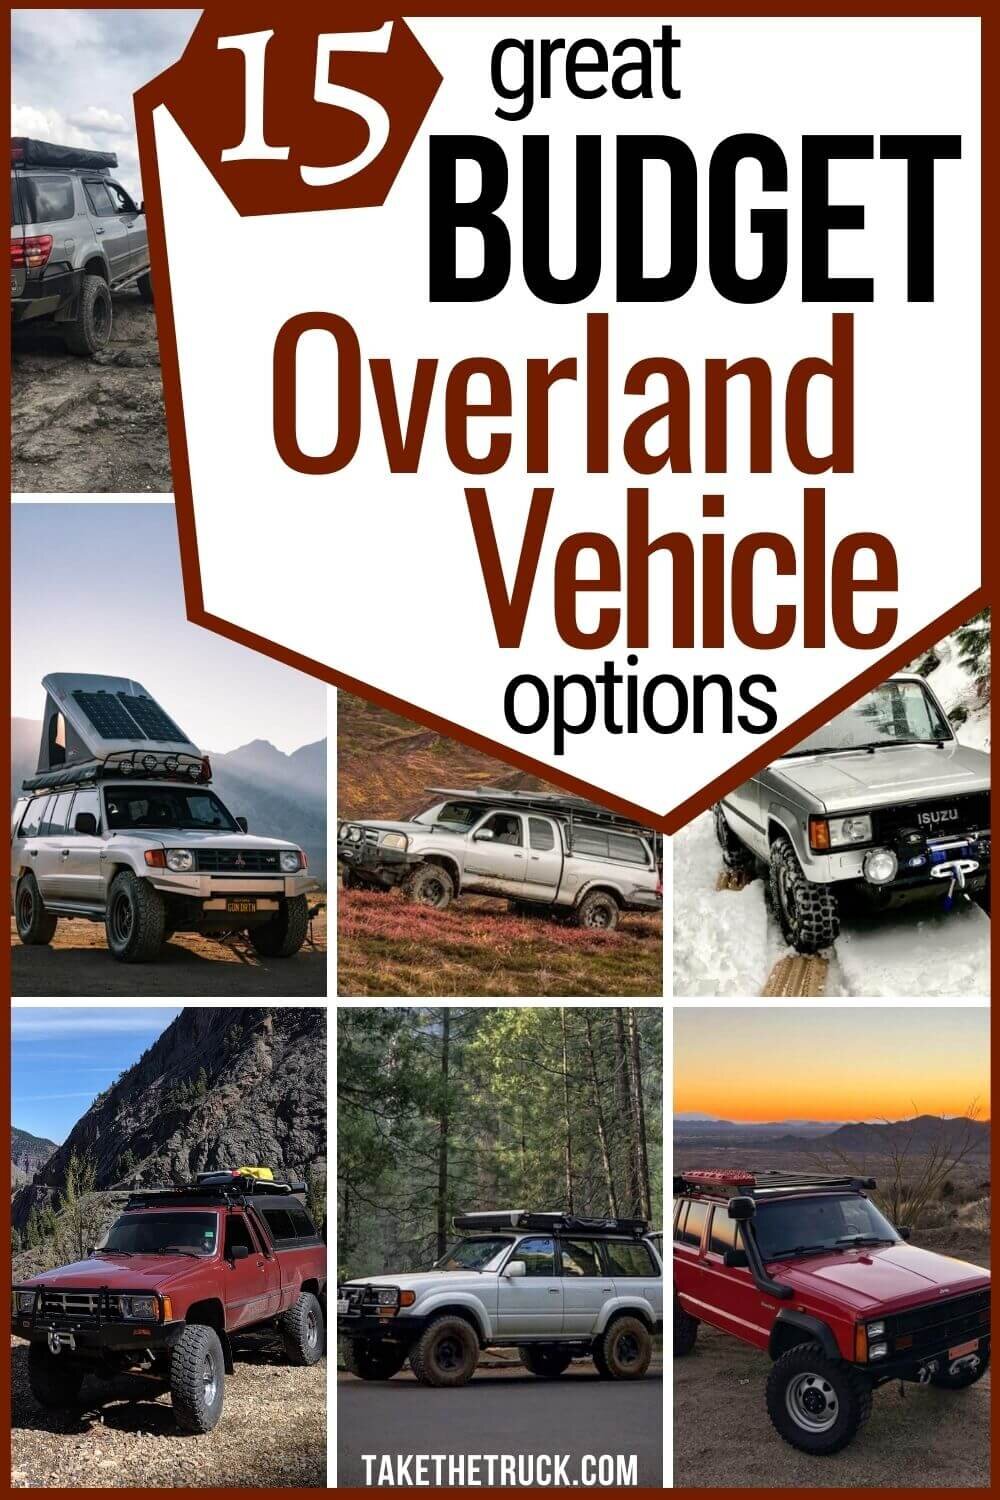 15 budget overland vehicle options if you’re overlanding on a budget. Cheap overland vehicles with great budget overland build ideas to help you start your overlanding adventures now!